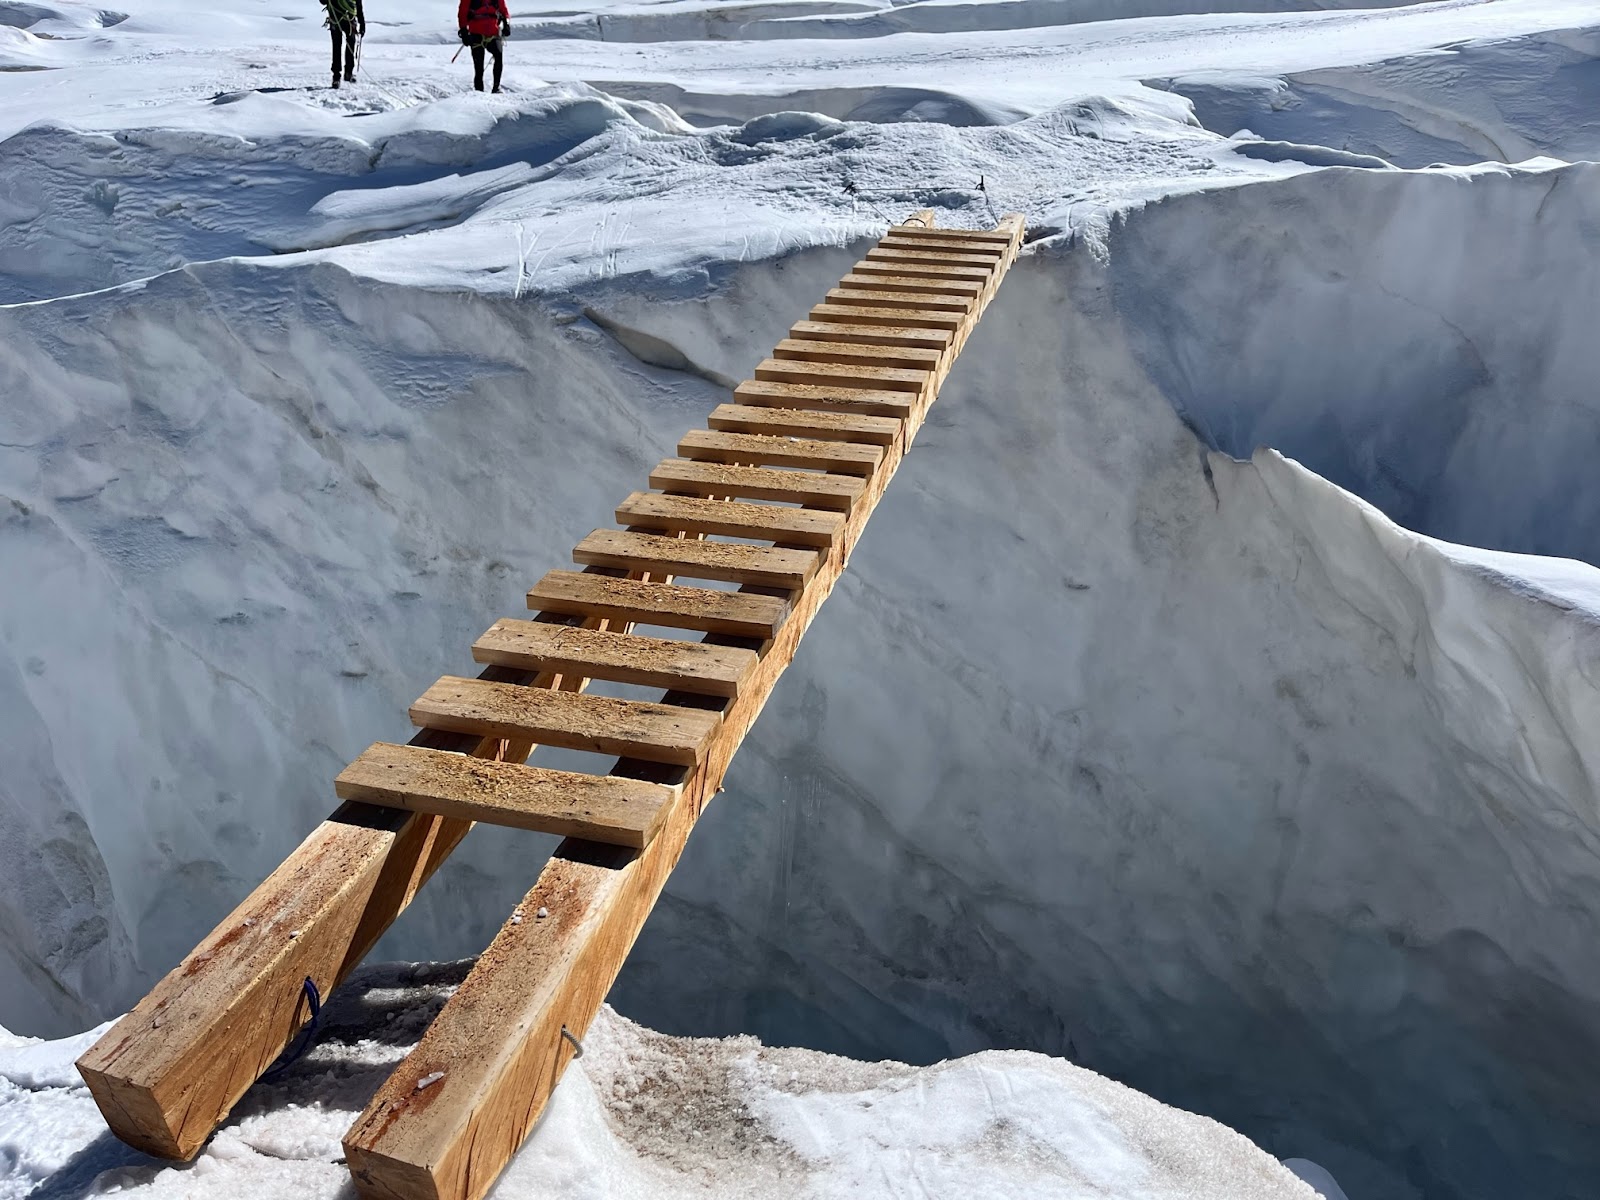 A wooden ladder bridging an ice crevasse on Gran Paradiso in the Alps.